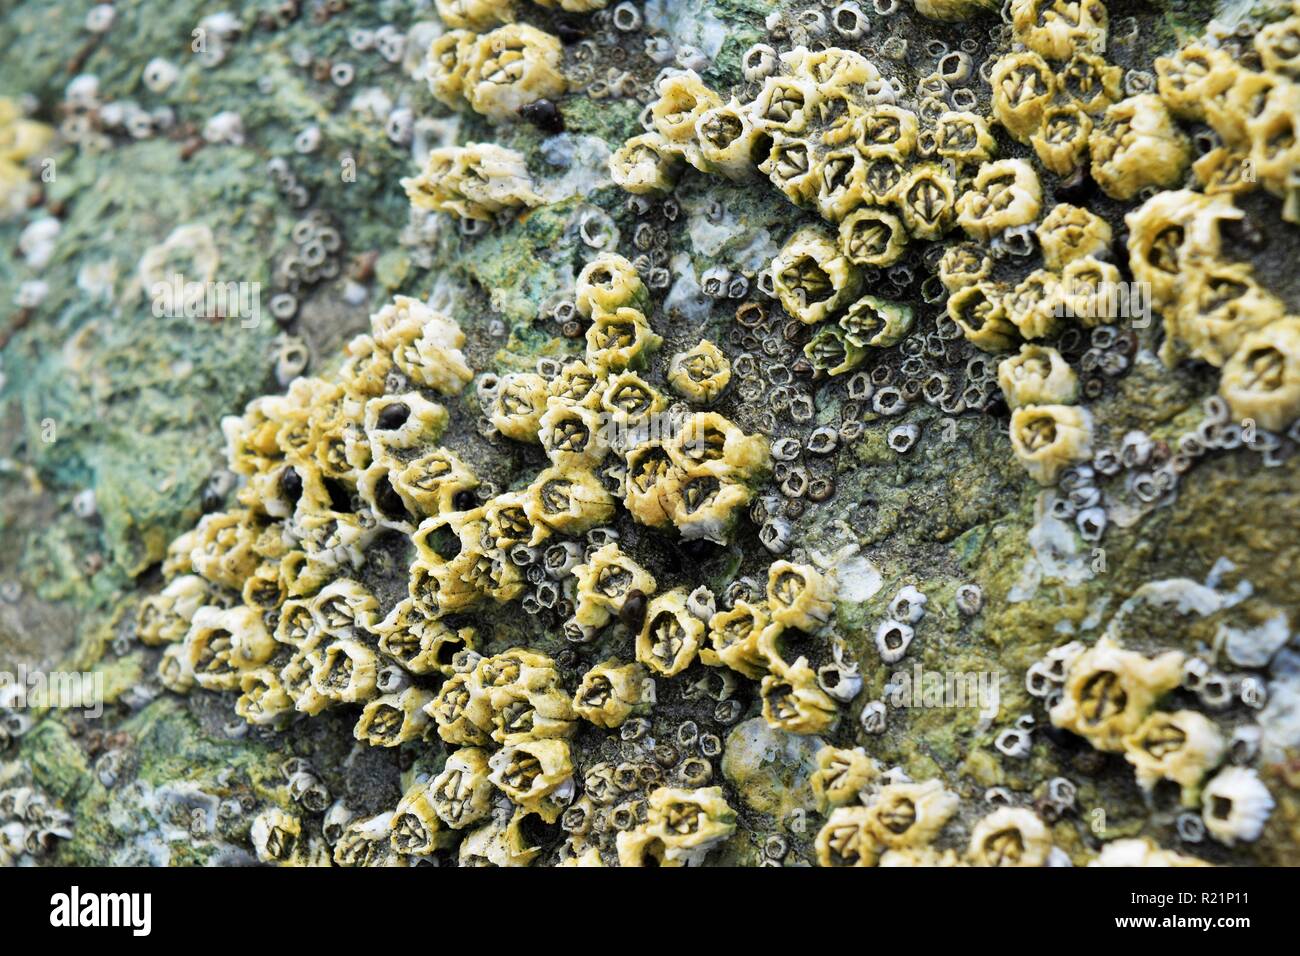 close up of barnacles on a rock during low tide Stock Photo